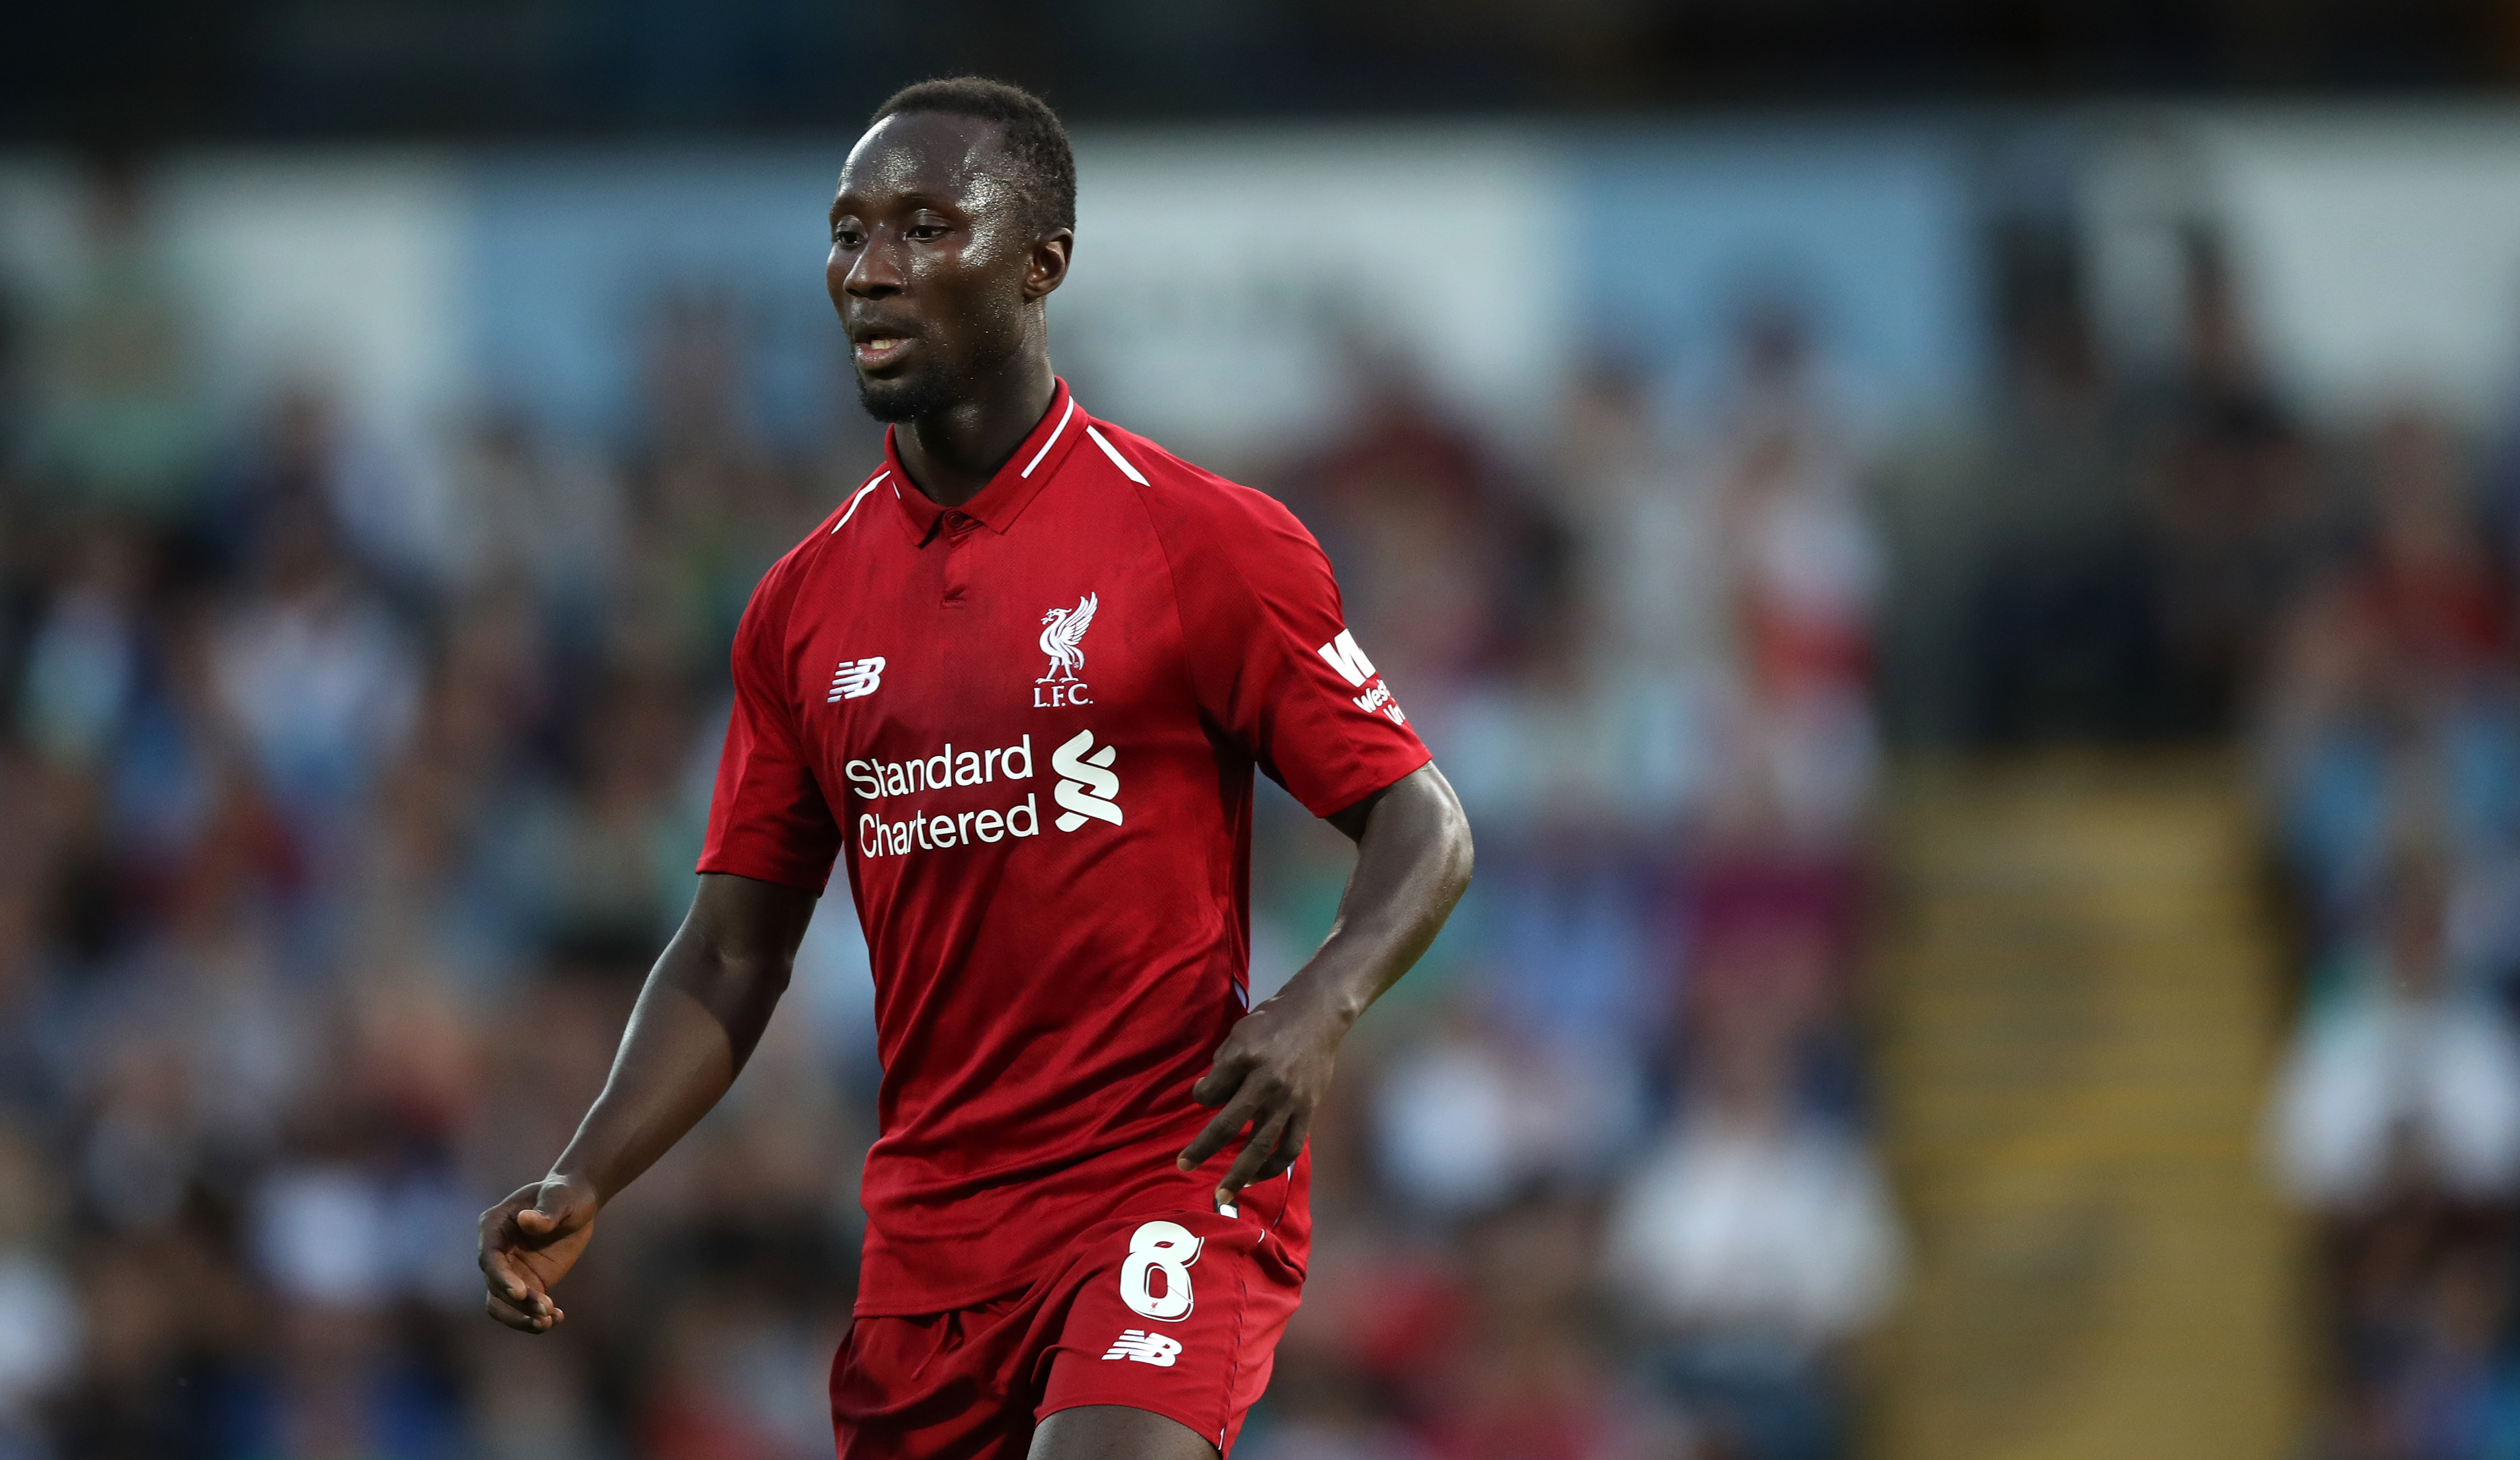 BLACKBURN, ENGLAND - JULY 19:  Naby Keita of Liverpool  during the Pre-Season Friendly between Blackburn Rovers and Liverpool  at Ewood Park on July 19, 2018 in Blackburn, England. (Photo by Lynne Cameron/Getty Images)